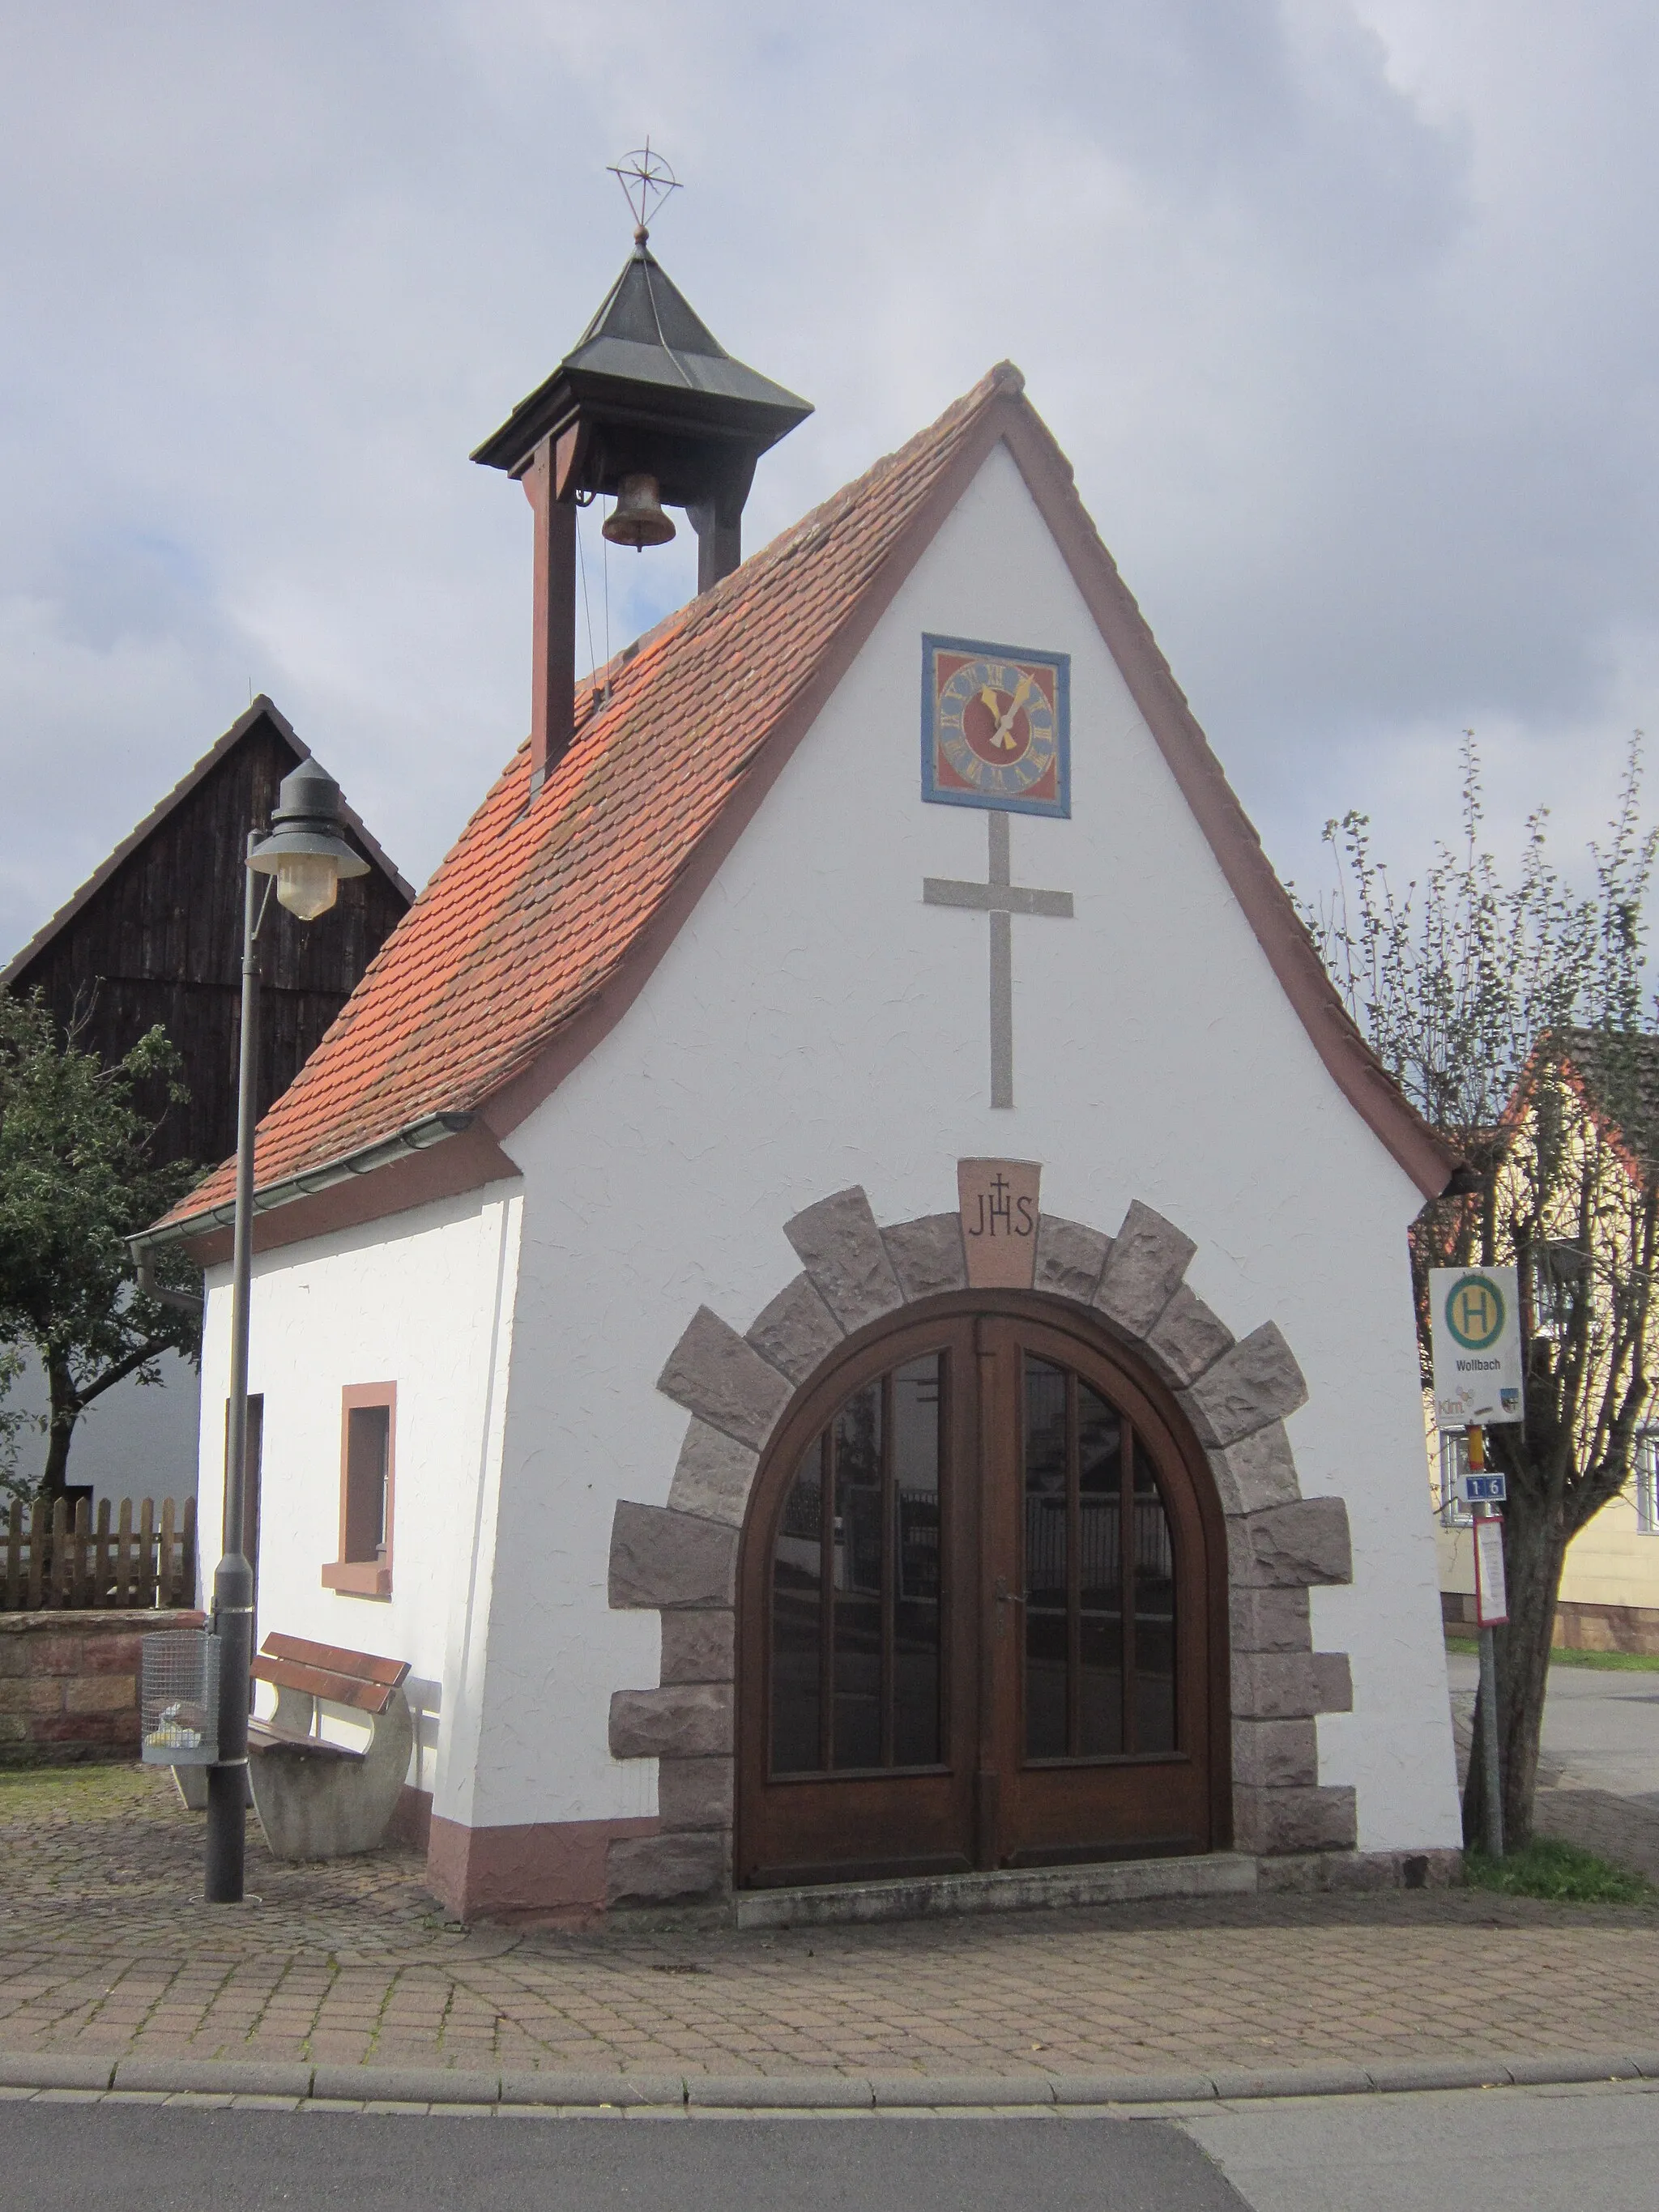 Photo showing: "Glöckle" Chapel in Wollbach, a quarter of the German town of Burkardroth in Lower Franconia (Bavaria).